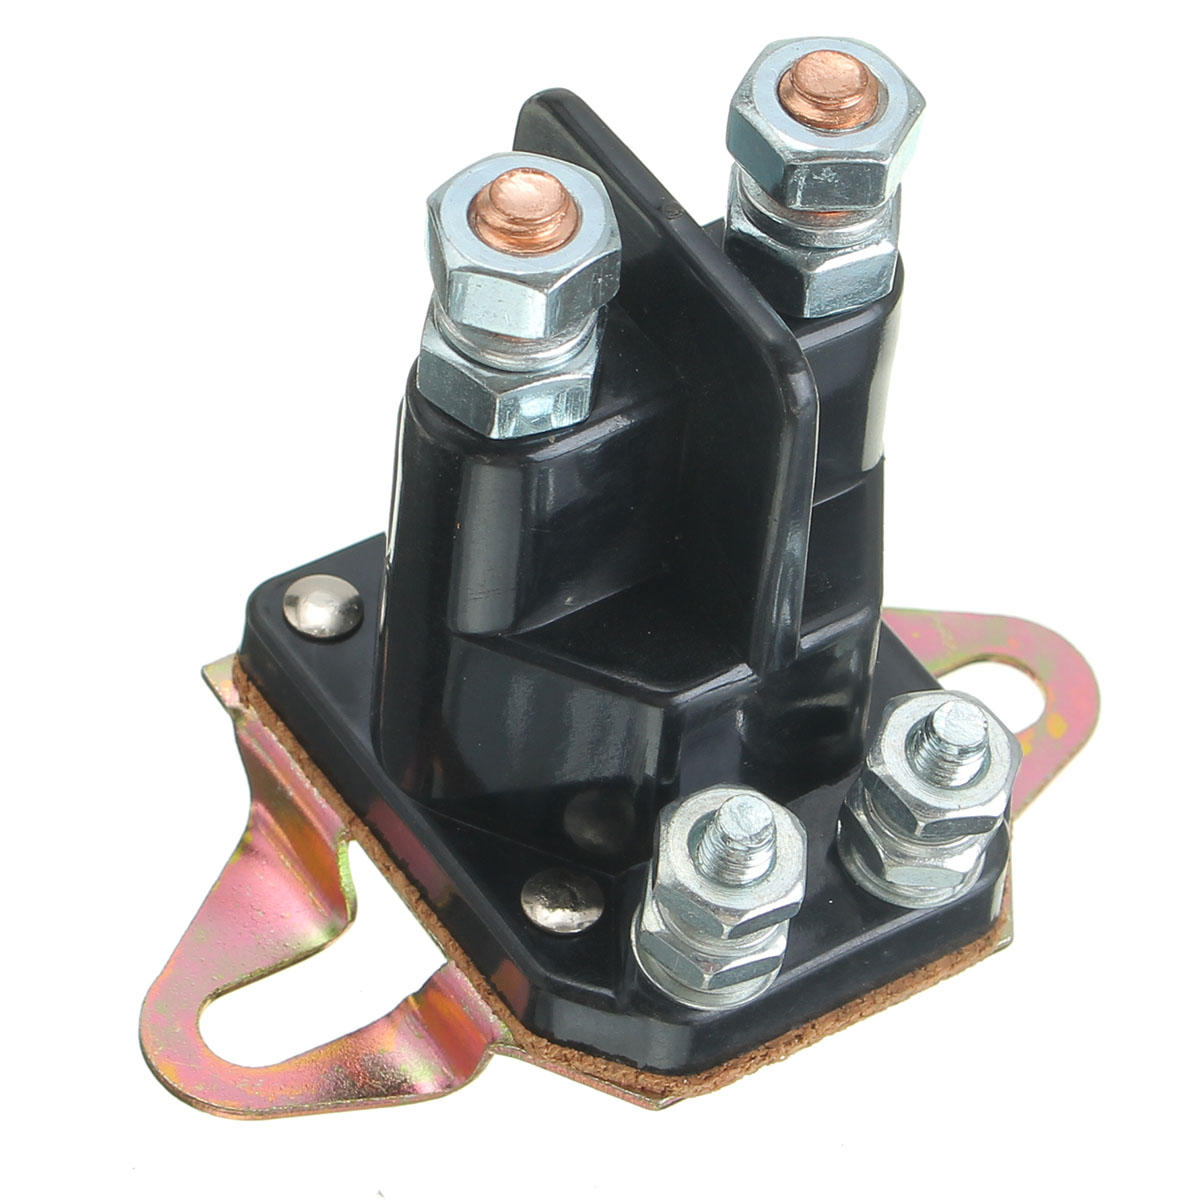 

12V Starter Solenoid Relay Contactor Switch Engine For BRIGGS & STRATTON MTD